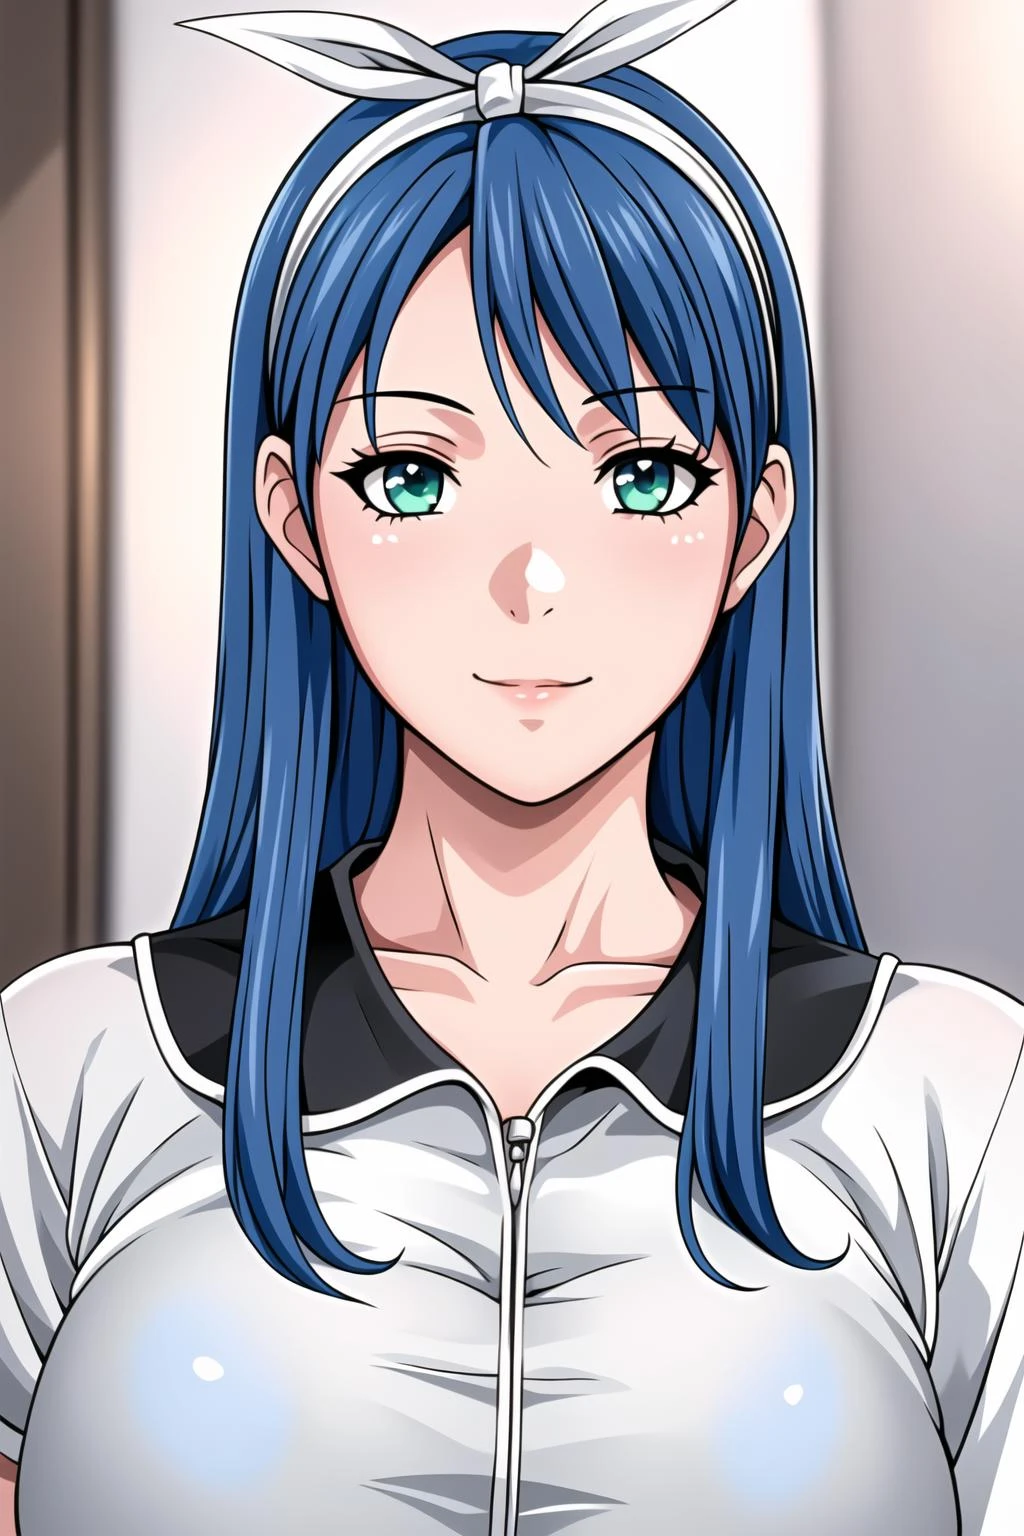 A close up of a person with blue hair and a white shirt - SeaArt AI